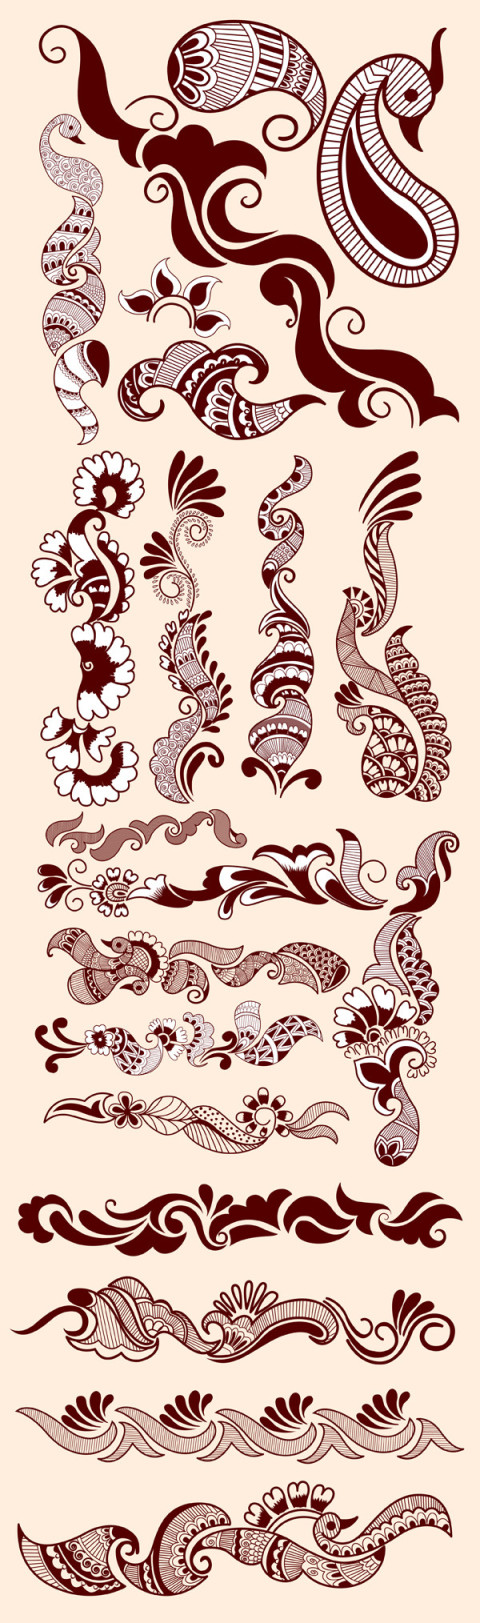 Premium Free Vector Different Mehandi Designs PNG Image With Transparent Background